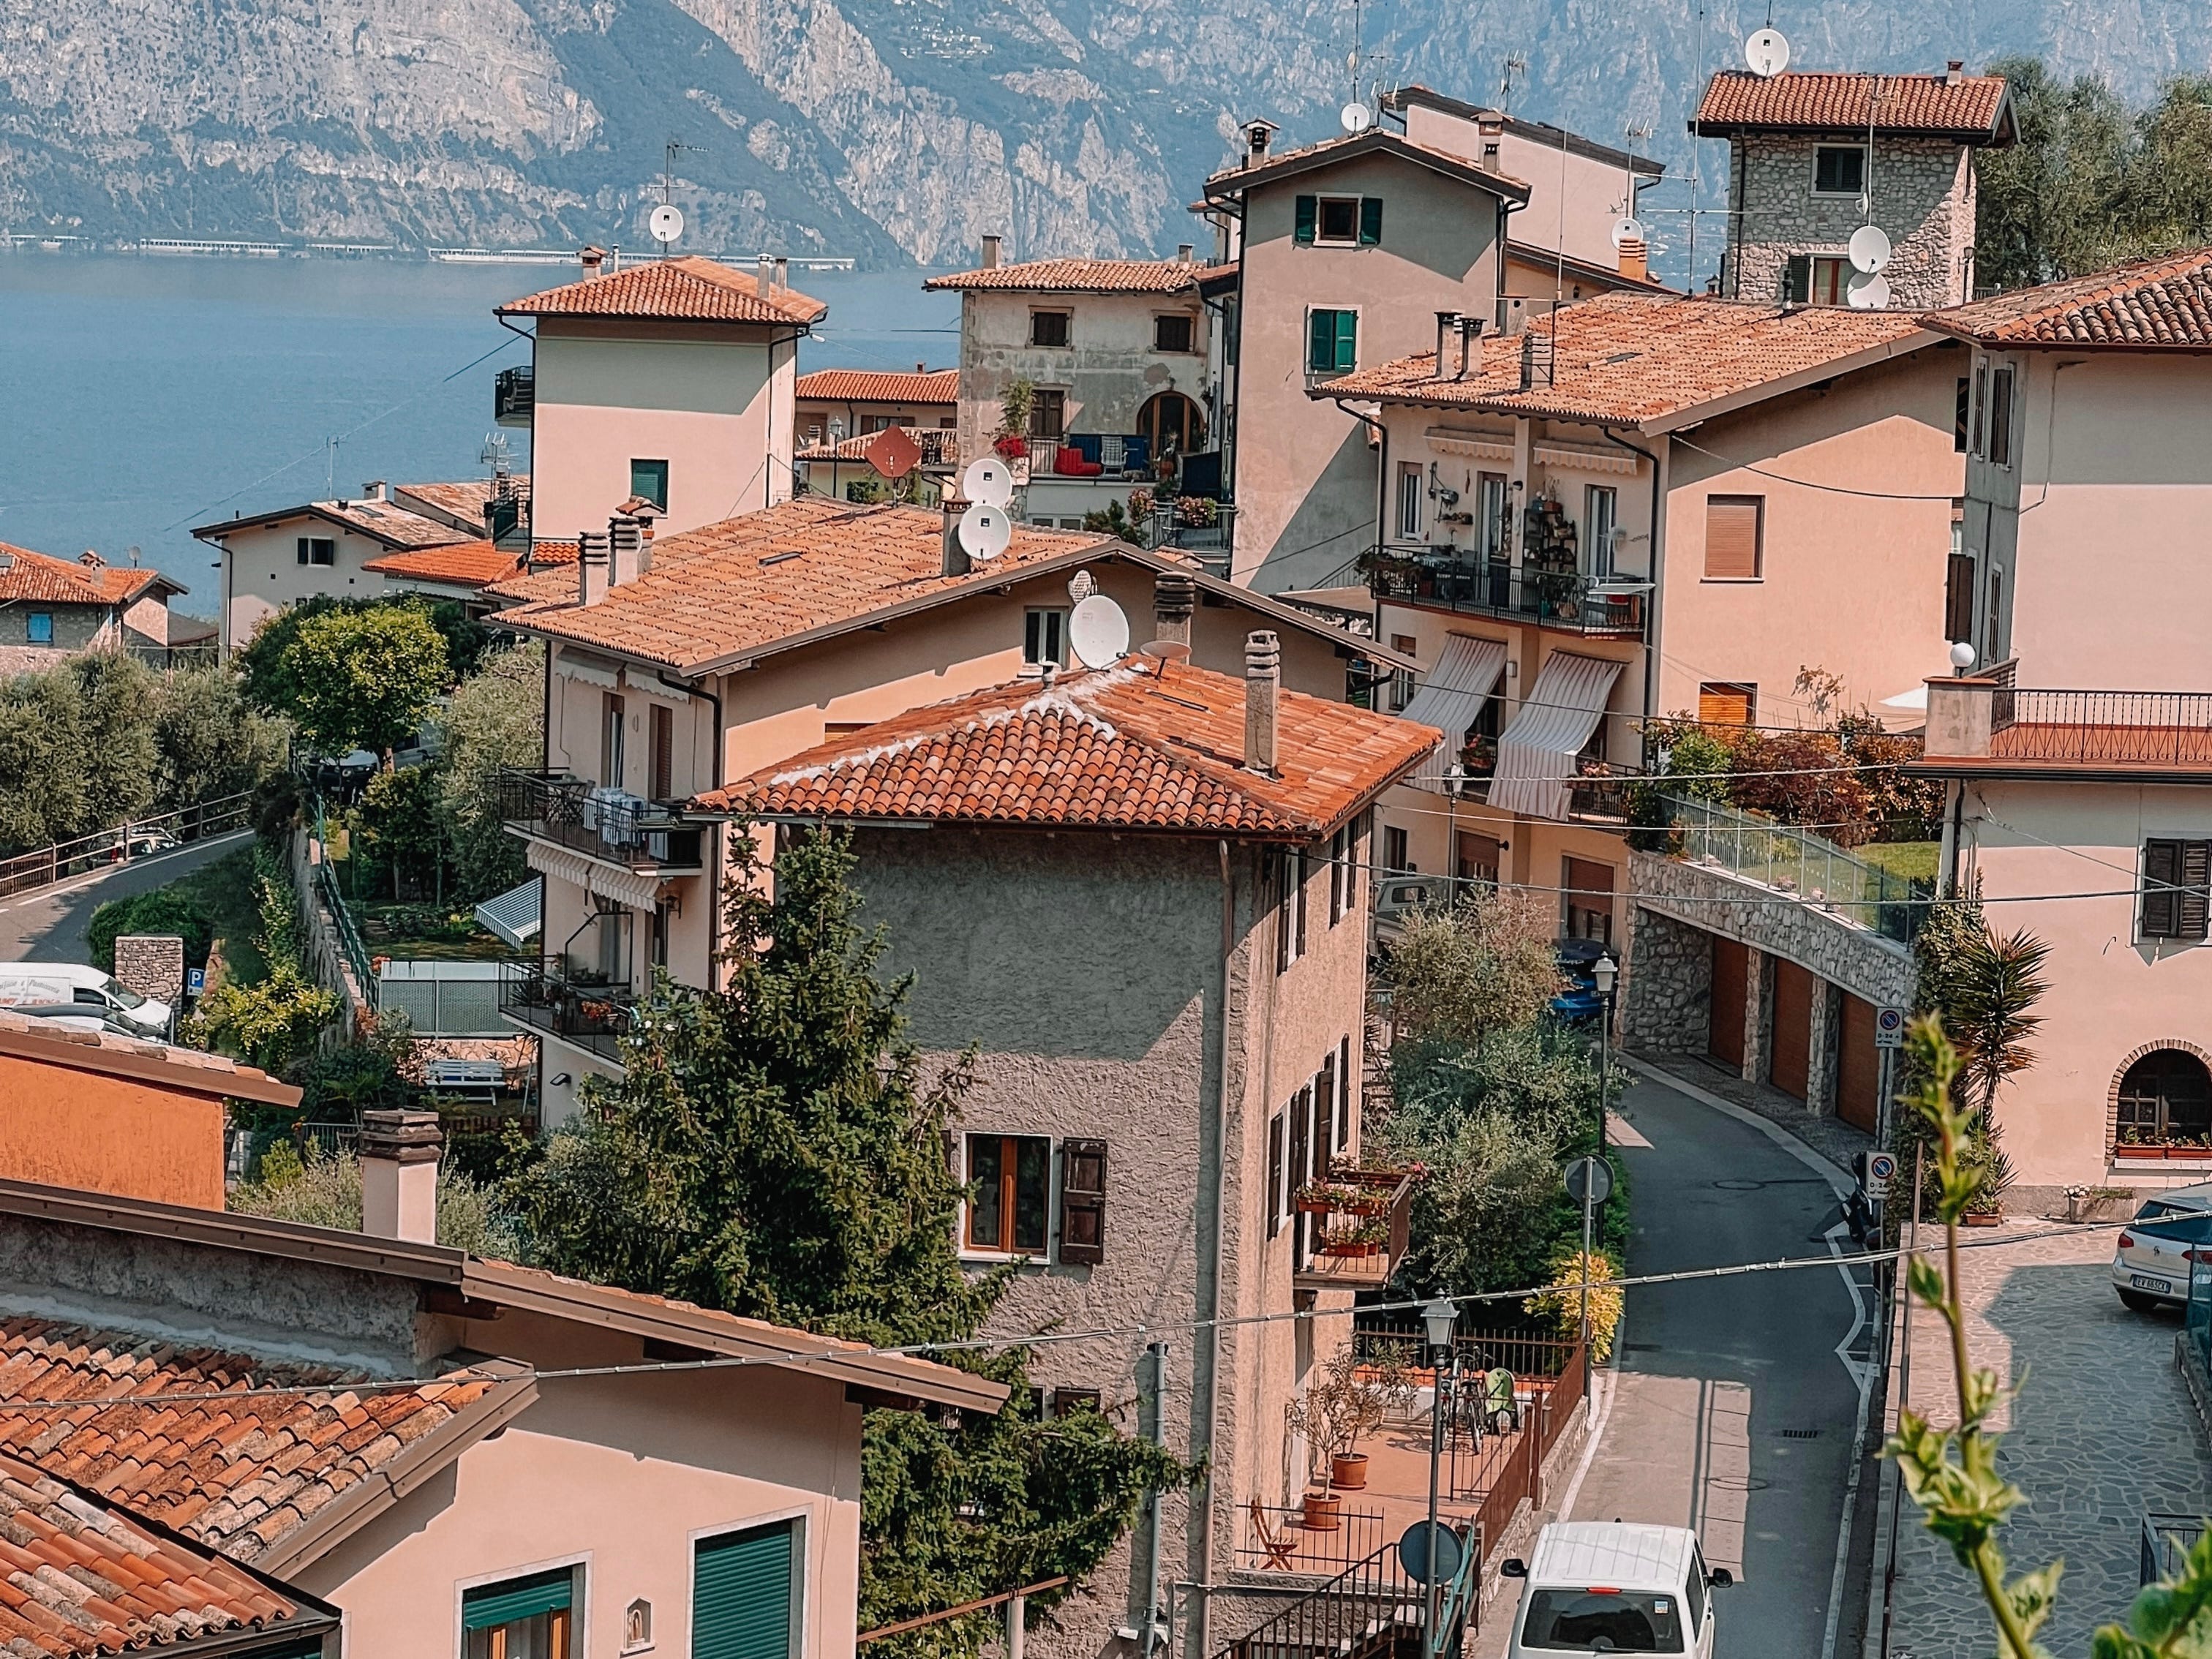 microsoft, i quit my finance job and became an airbnb host in italy. i have no regrets about choosing happiness over money.